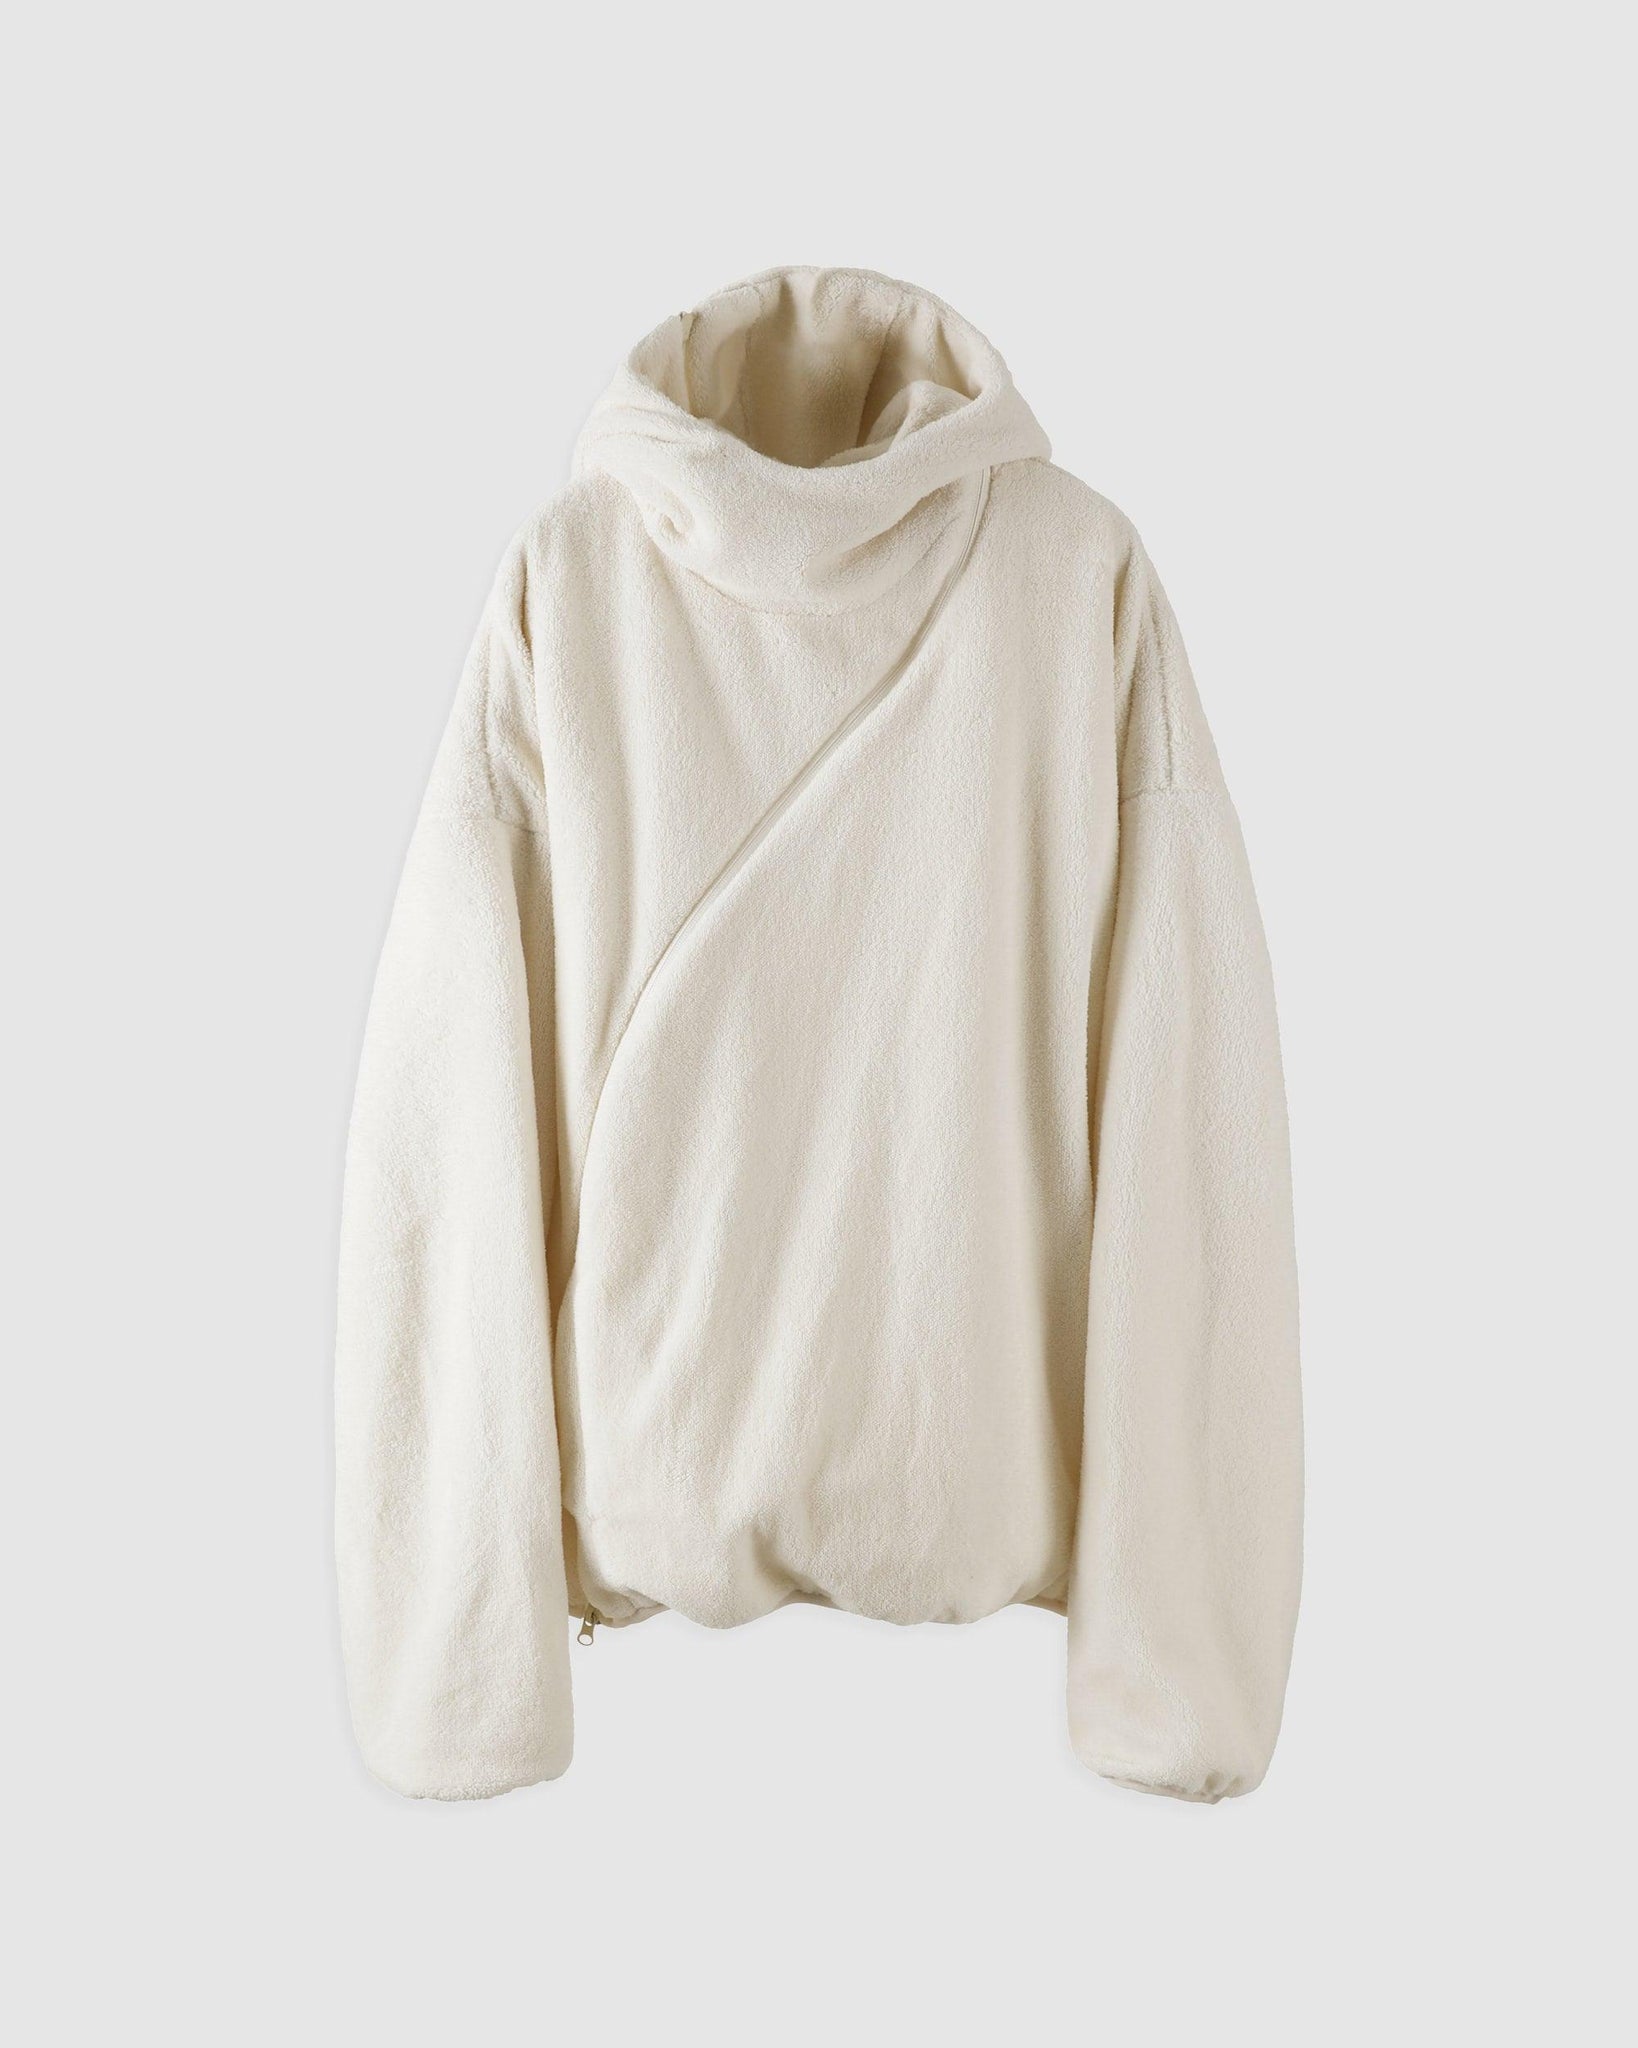 5.1 Hoodie Center Ivory - {{ collection.title }} - Chinatown Country Club 